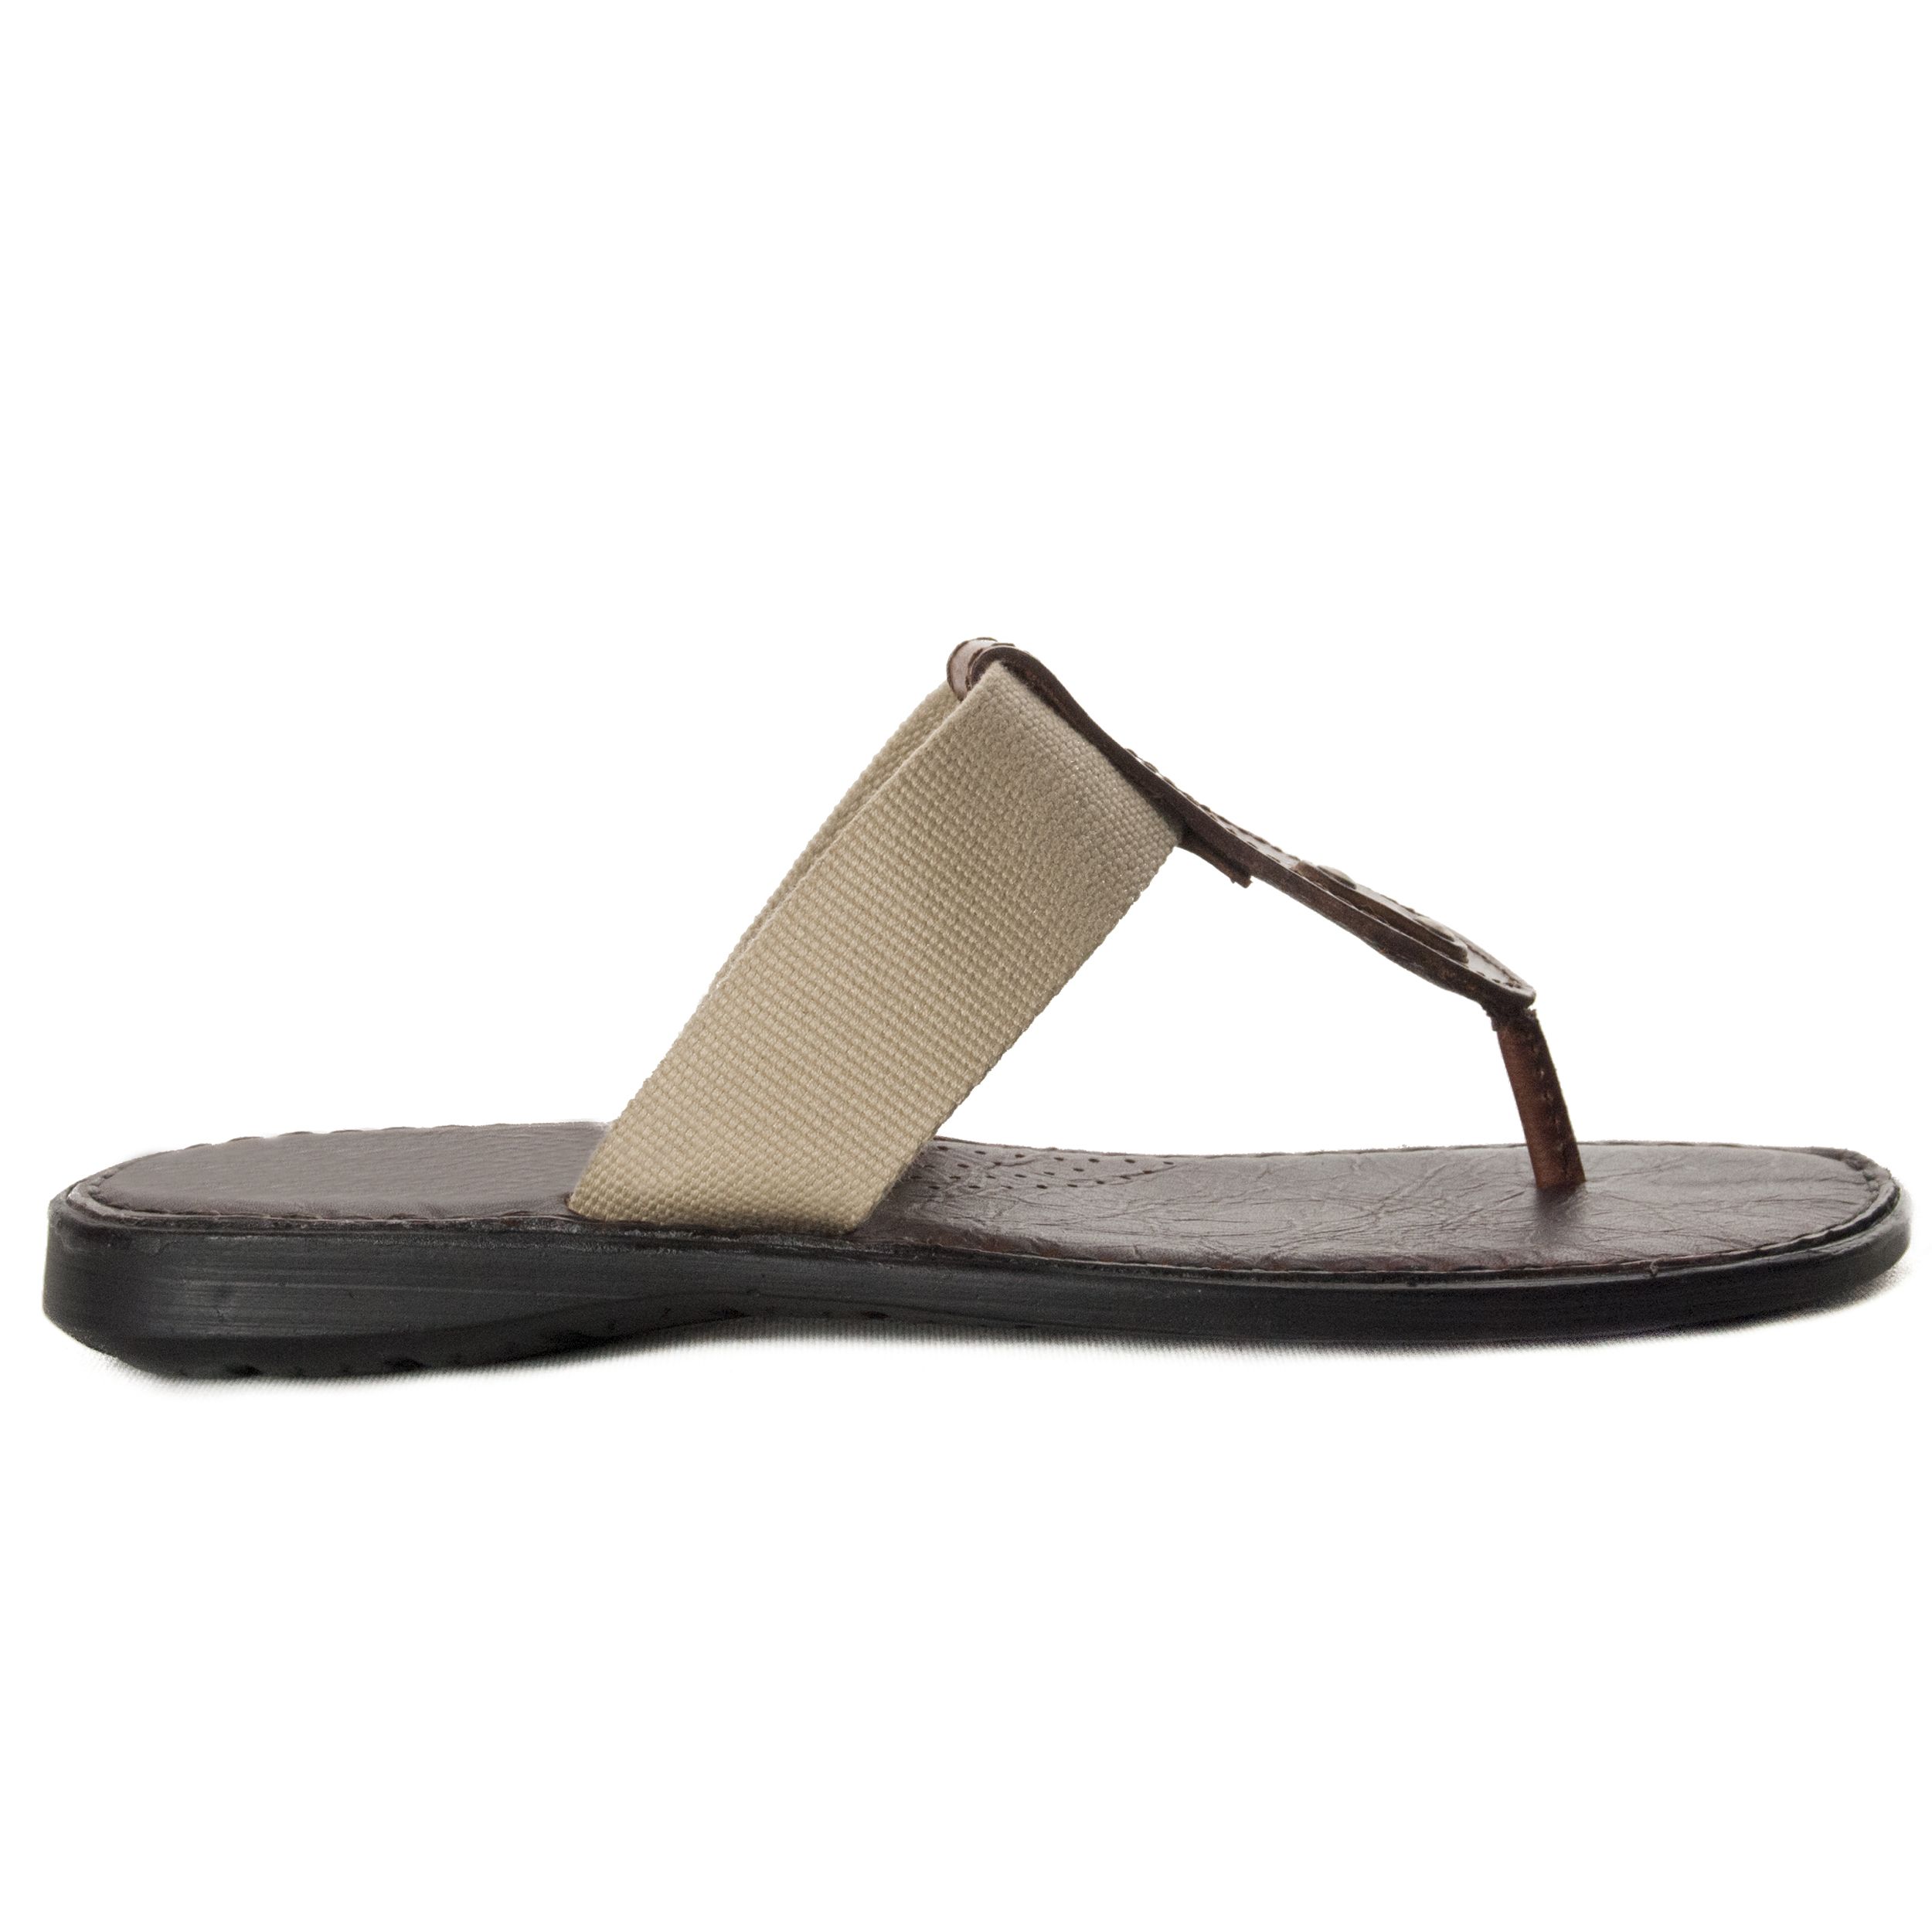 Men's skin sandal, with maximum comfort on the floor, by its gel, soft and padded template. Anatomical Grab on your finger. Very summer for his style. Made in Spain,